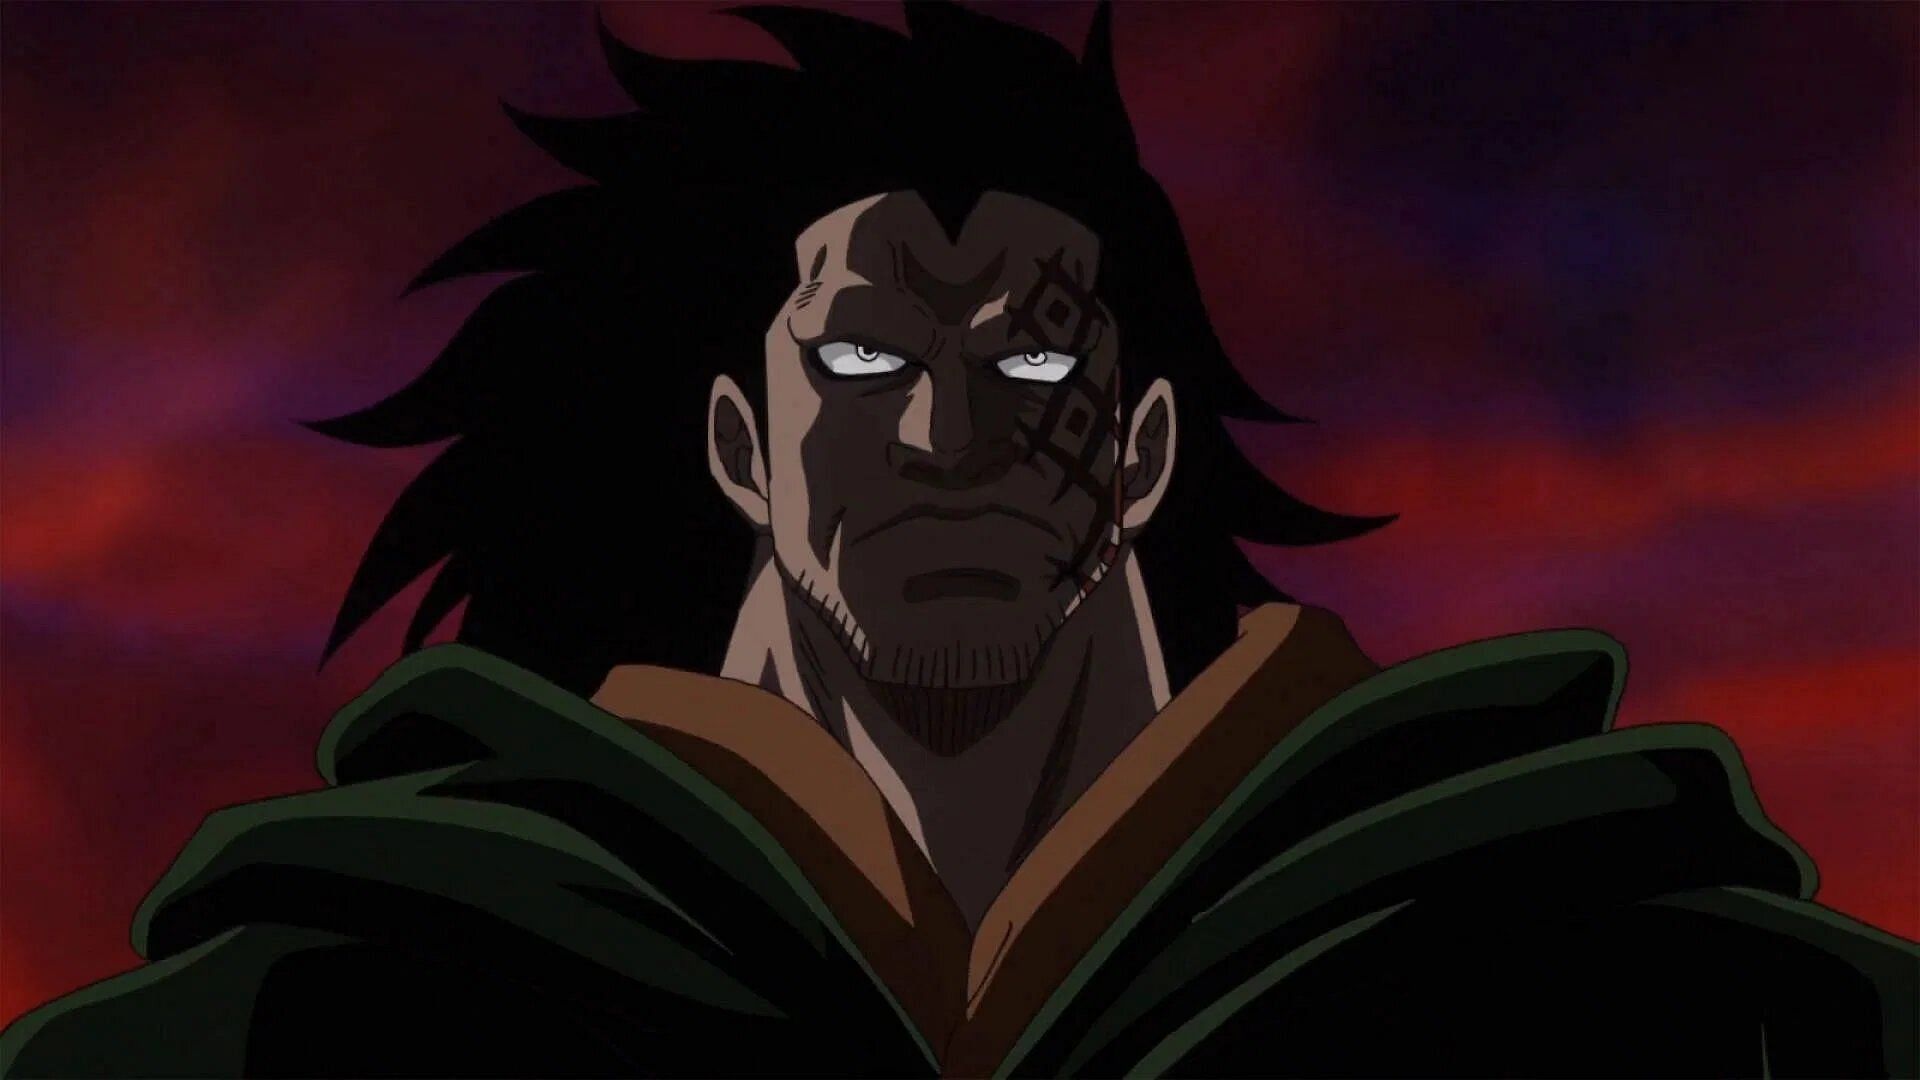 Another prominent example of anime characters like Endeavor (Image via Toei Animation)